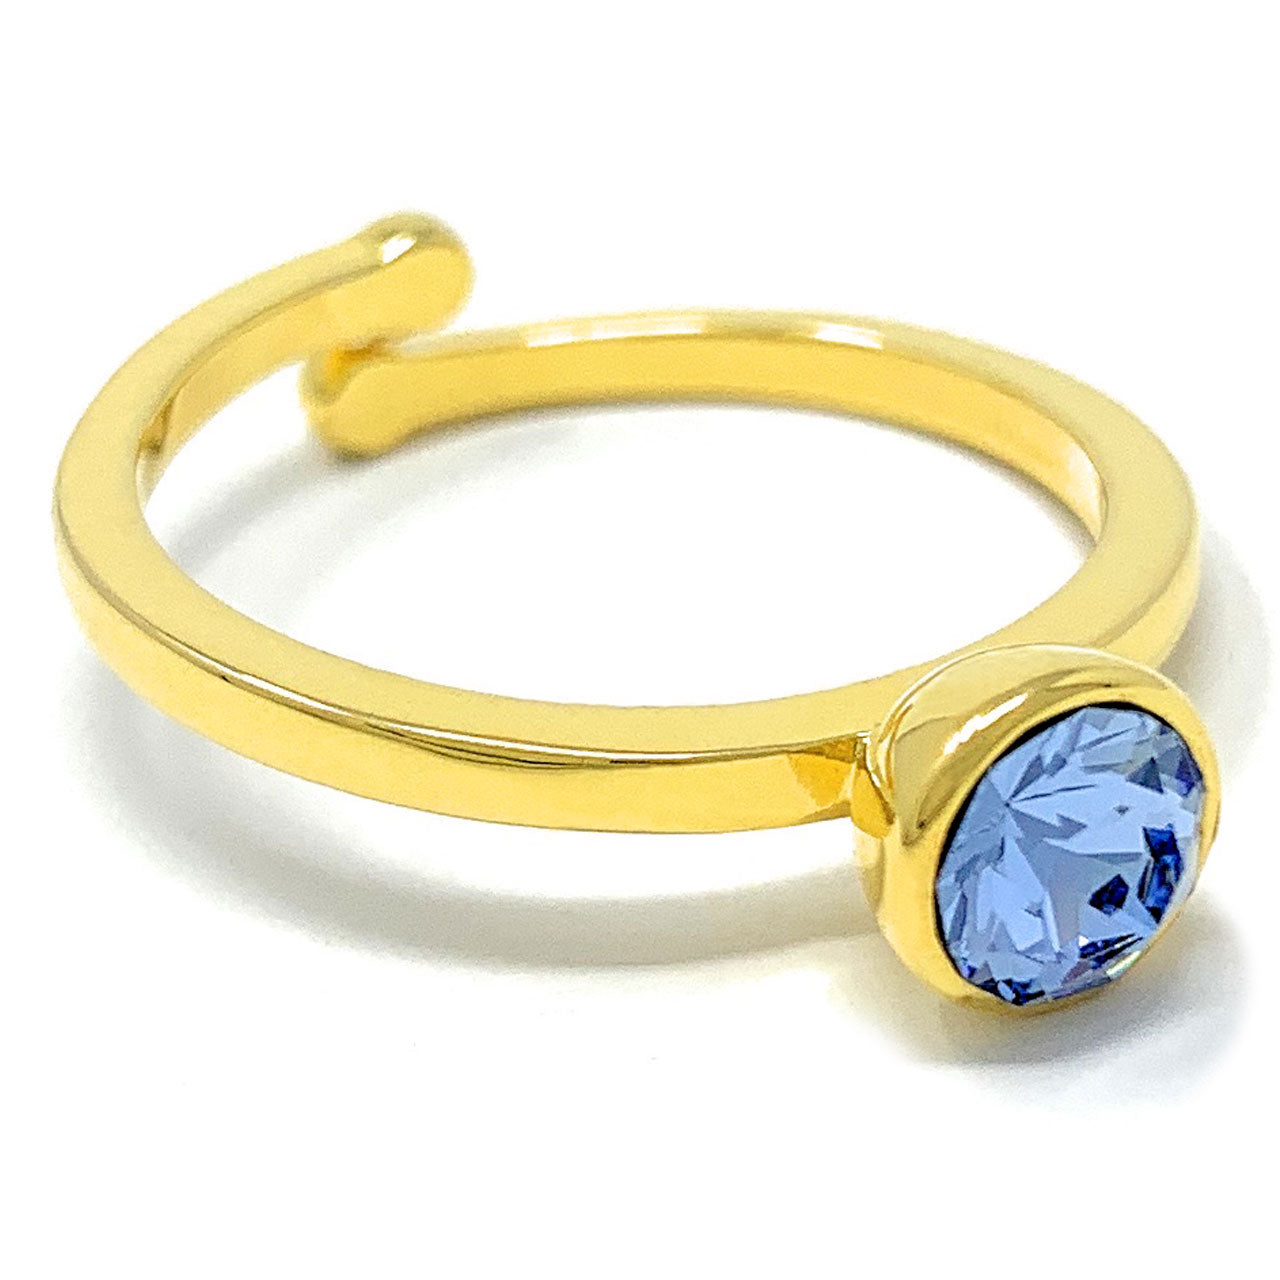 Harley Adjustable Ring with Blue Light Sapphire Round Crystals from Swarovski Gold Plated - Ed Heart